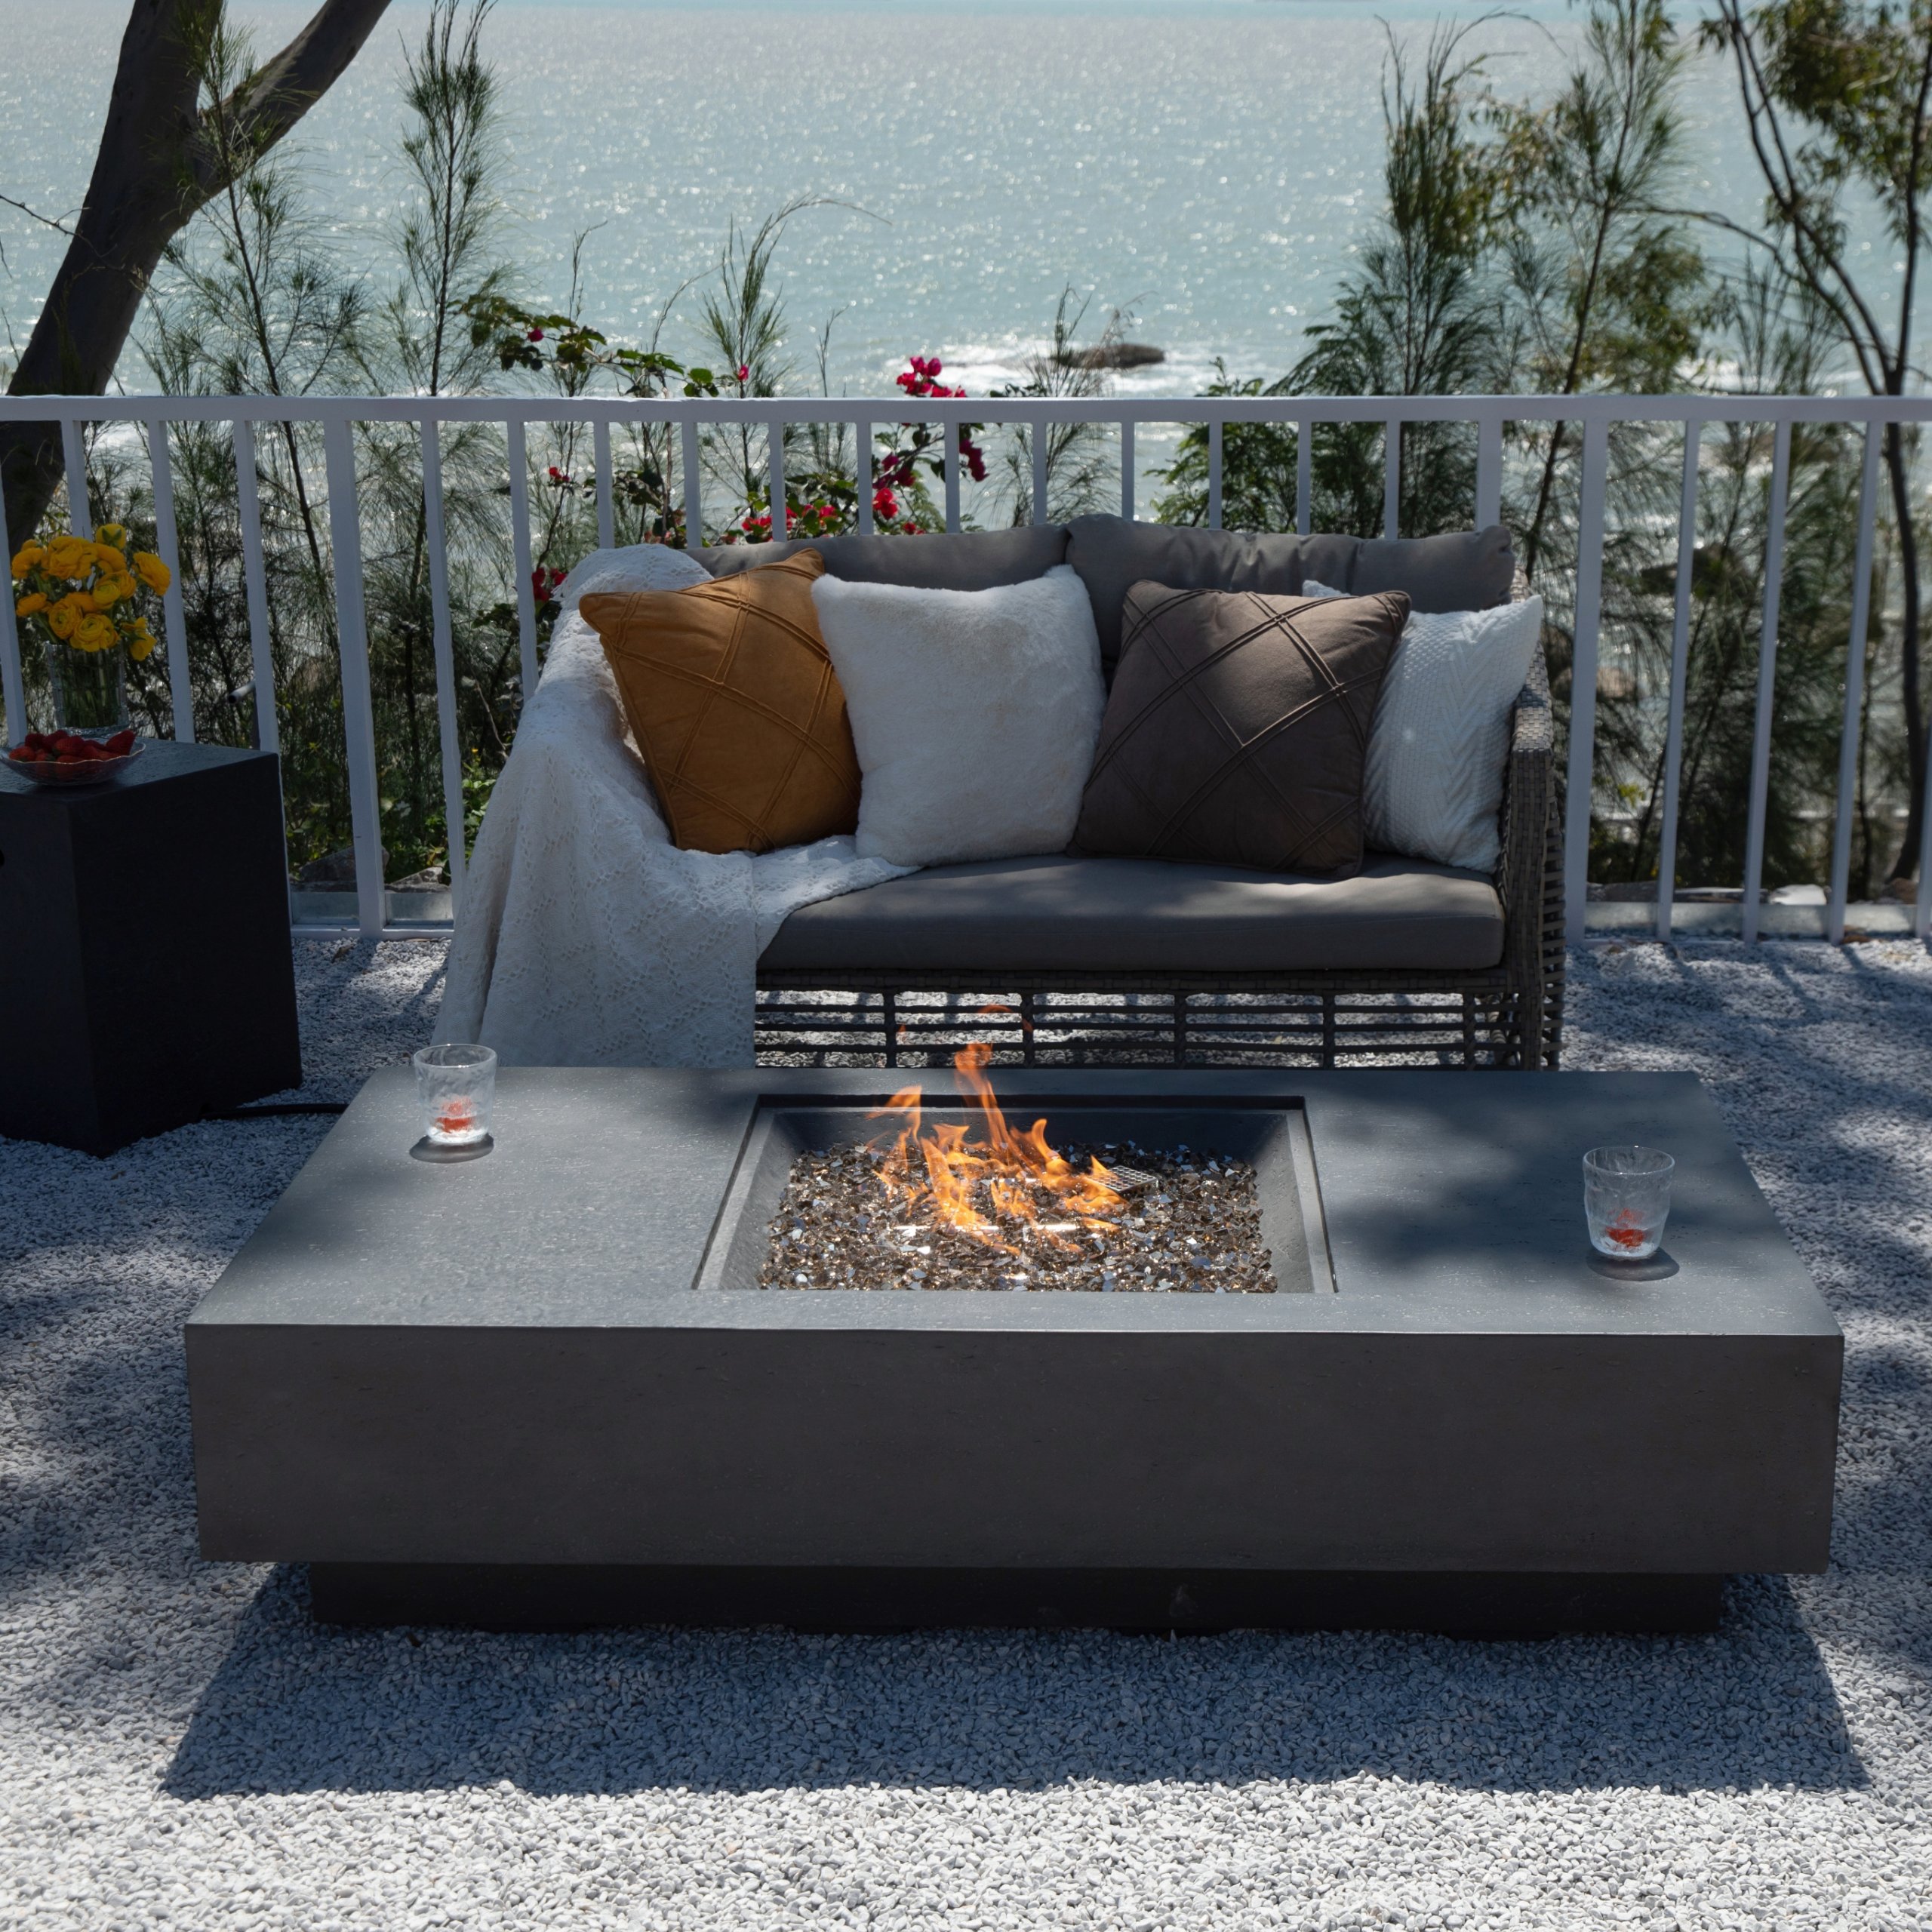 Cannes firepit from suns lifestyle